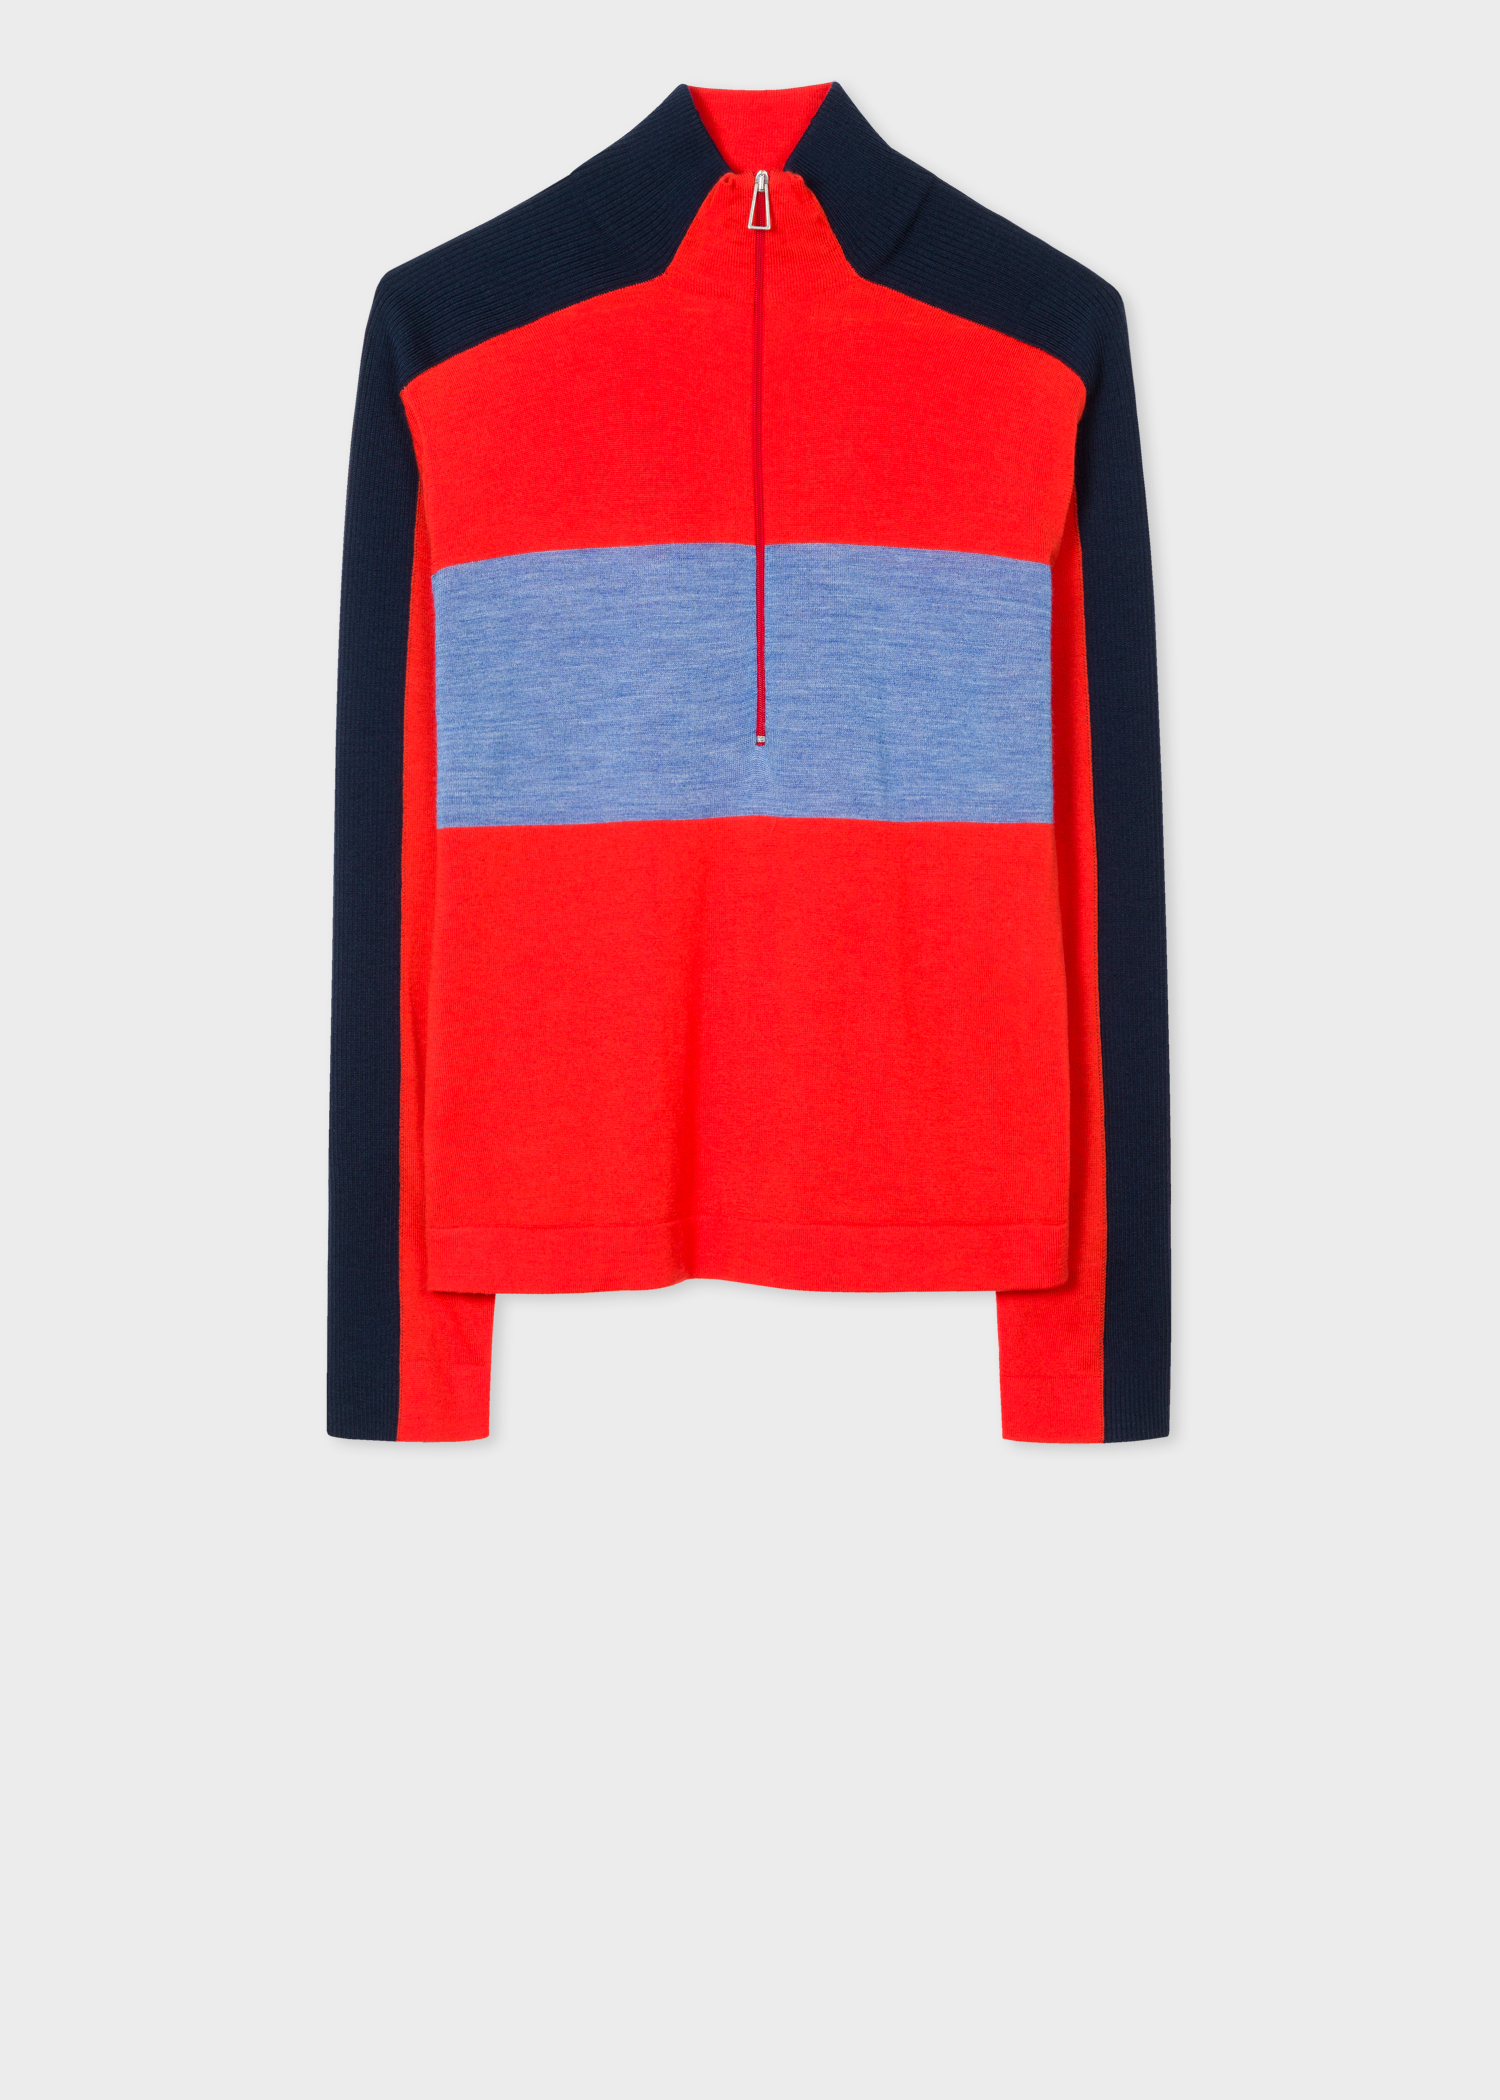 Front view - Women's Red Colour-Block Half-Zip Wool Sweater Paul Smith